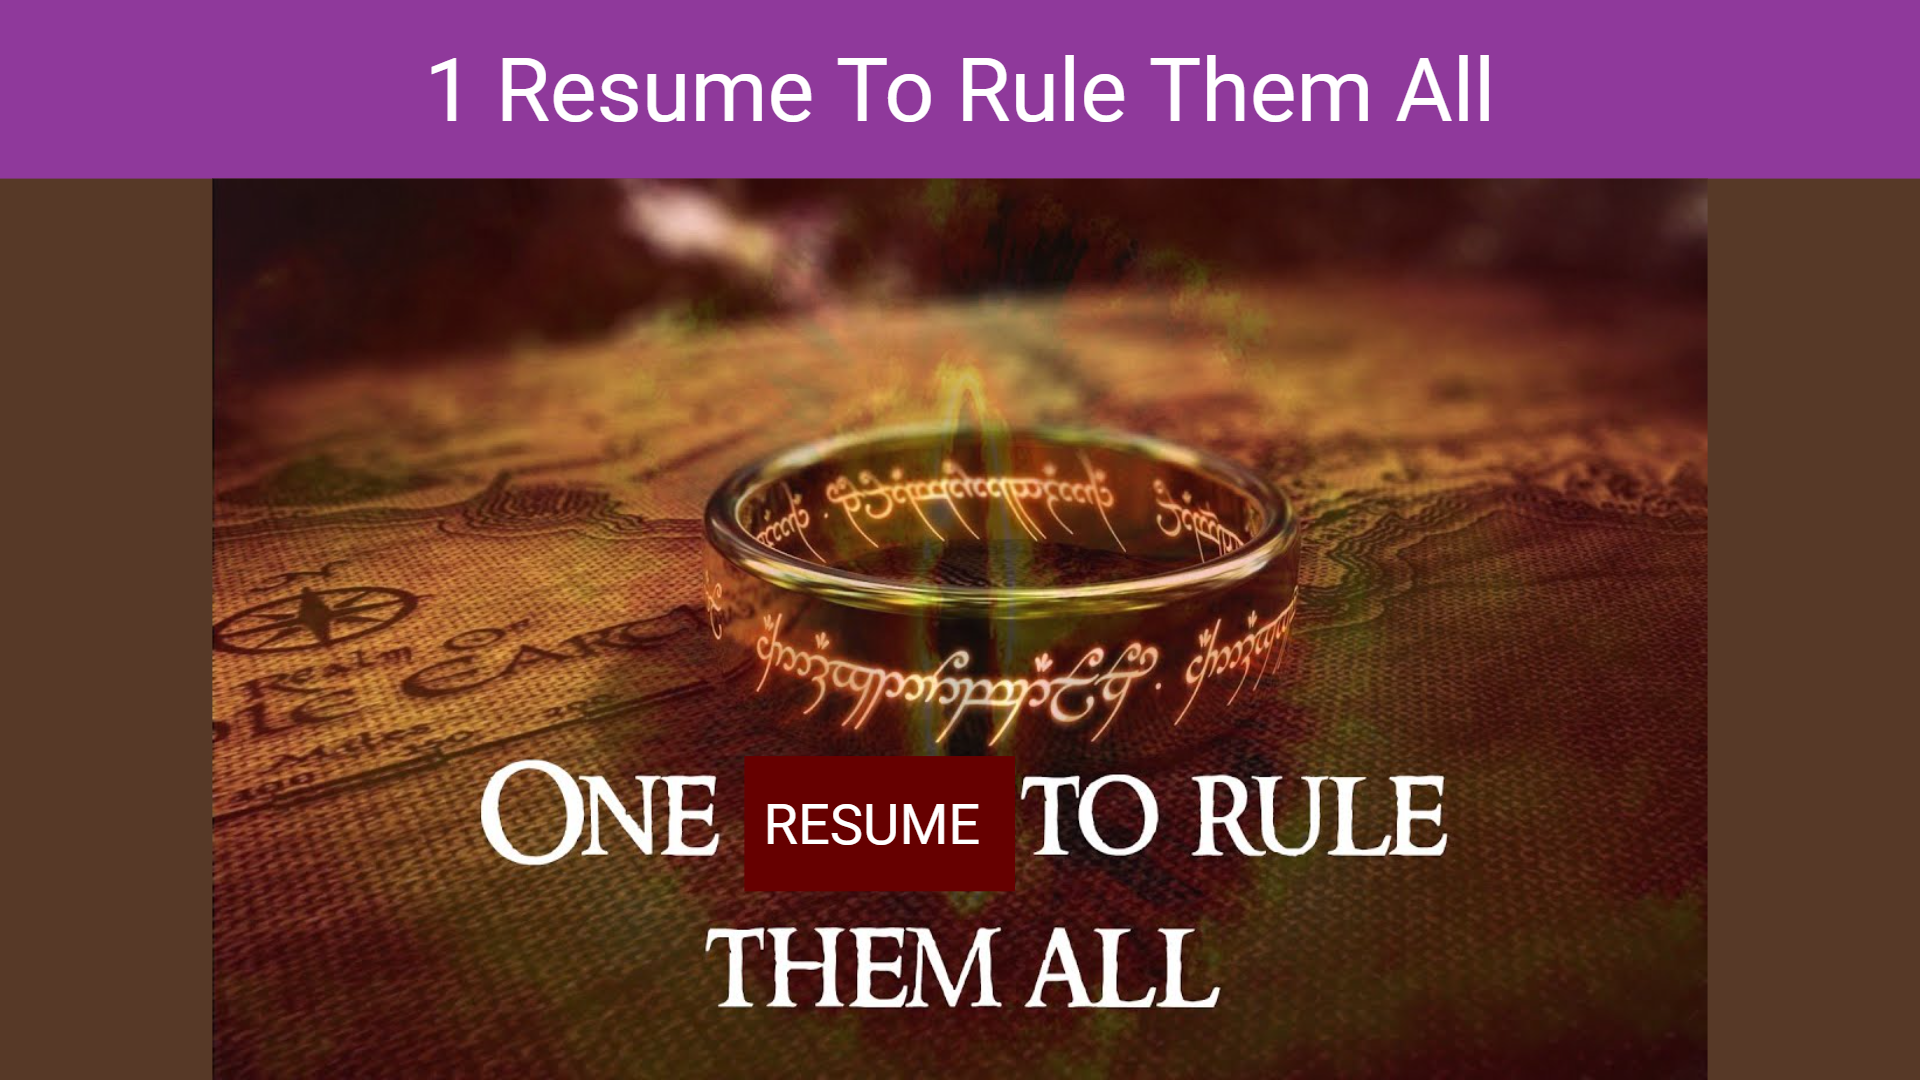 Write A Stellar Resume As A Software Engineer [Part 4] - 1 Resume To Rule Them All